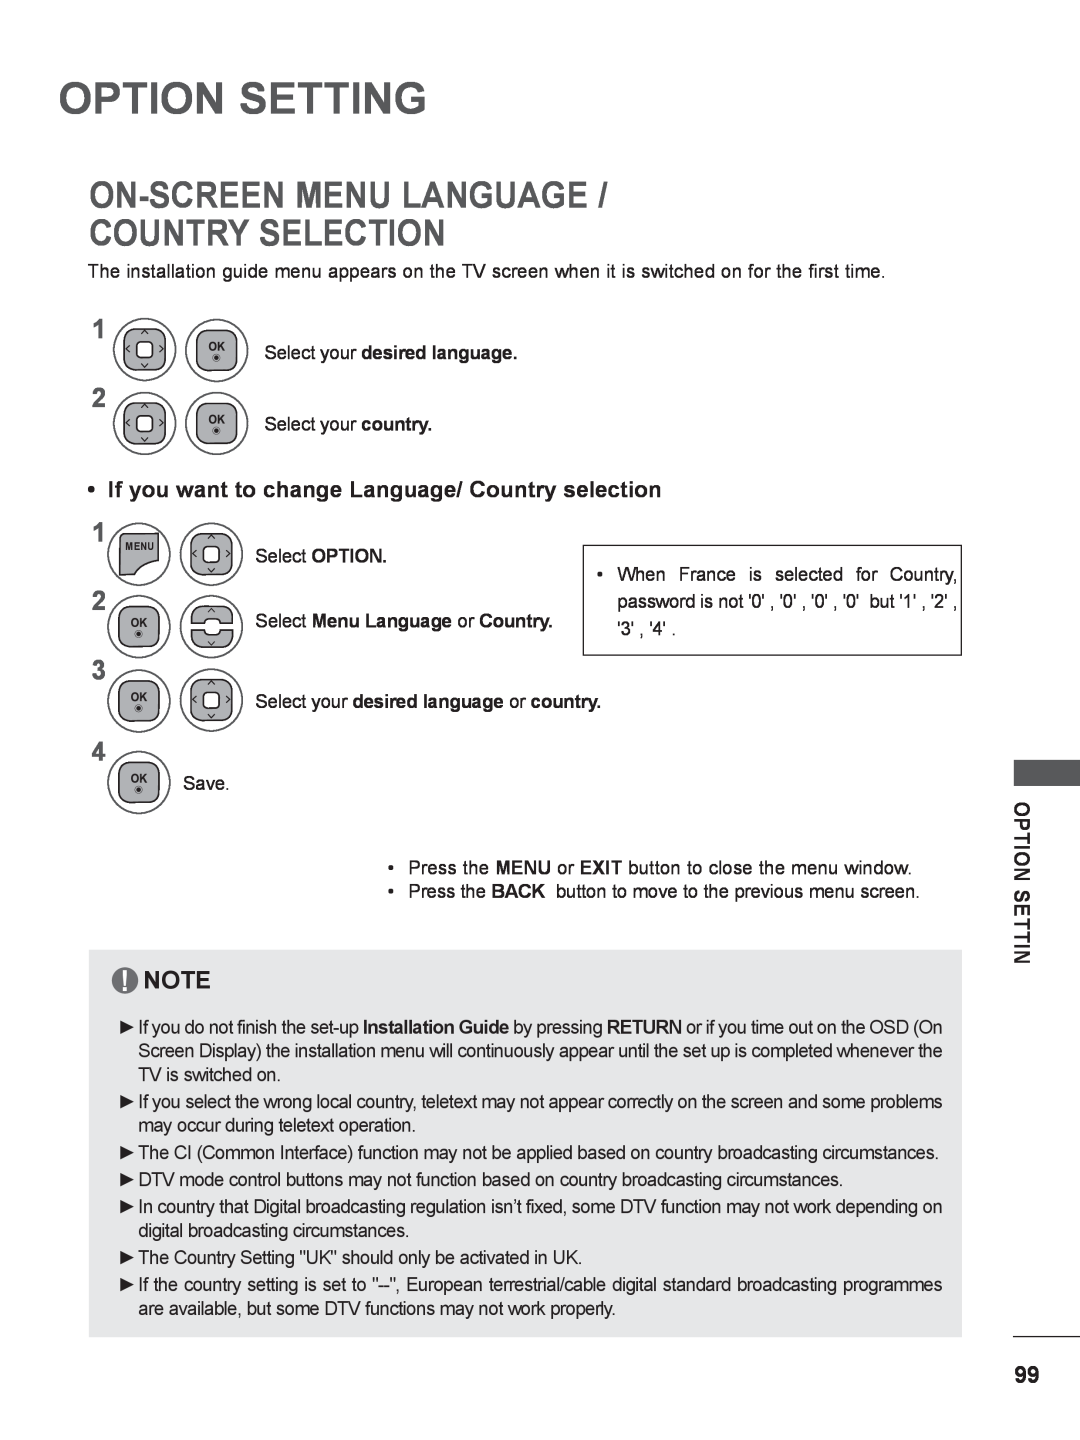 LG Electronics M2080DB, M2780DF Option Setting, On-Screen Menu Language Country Selection, Select your desired language 